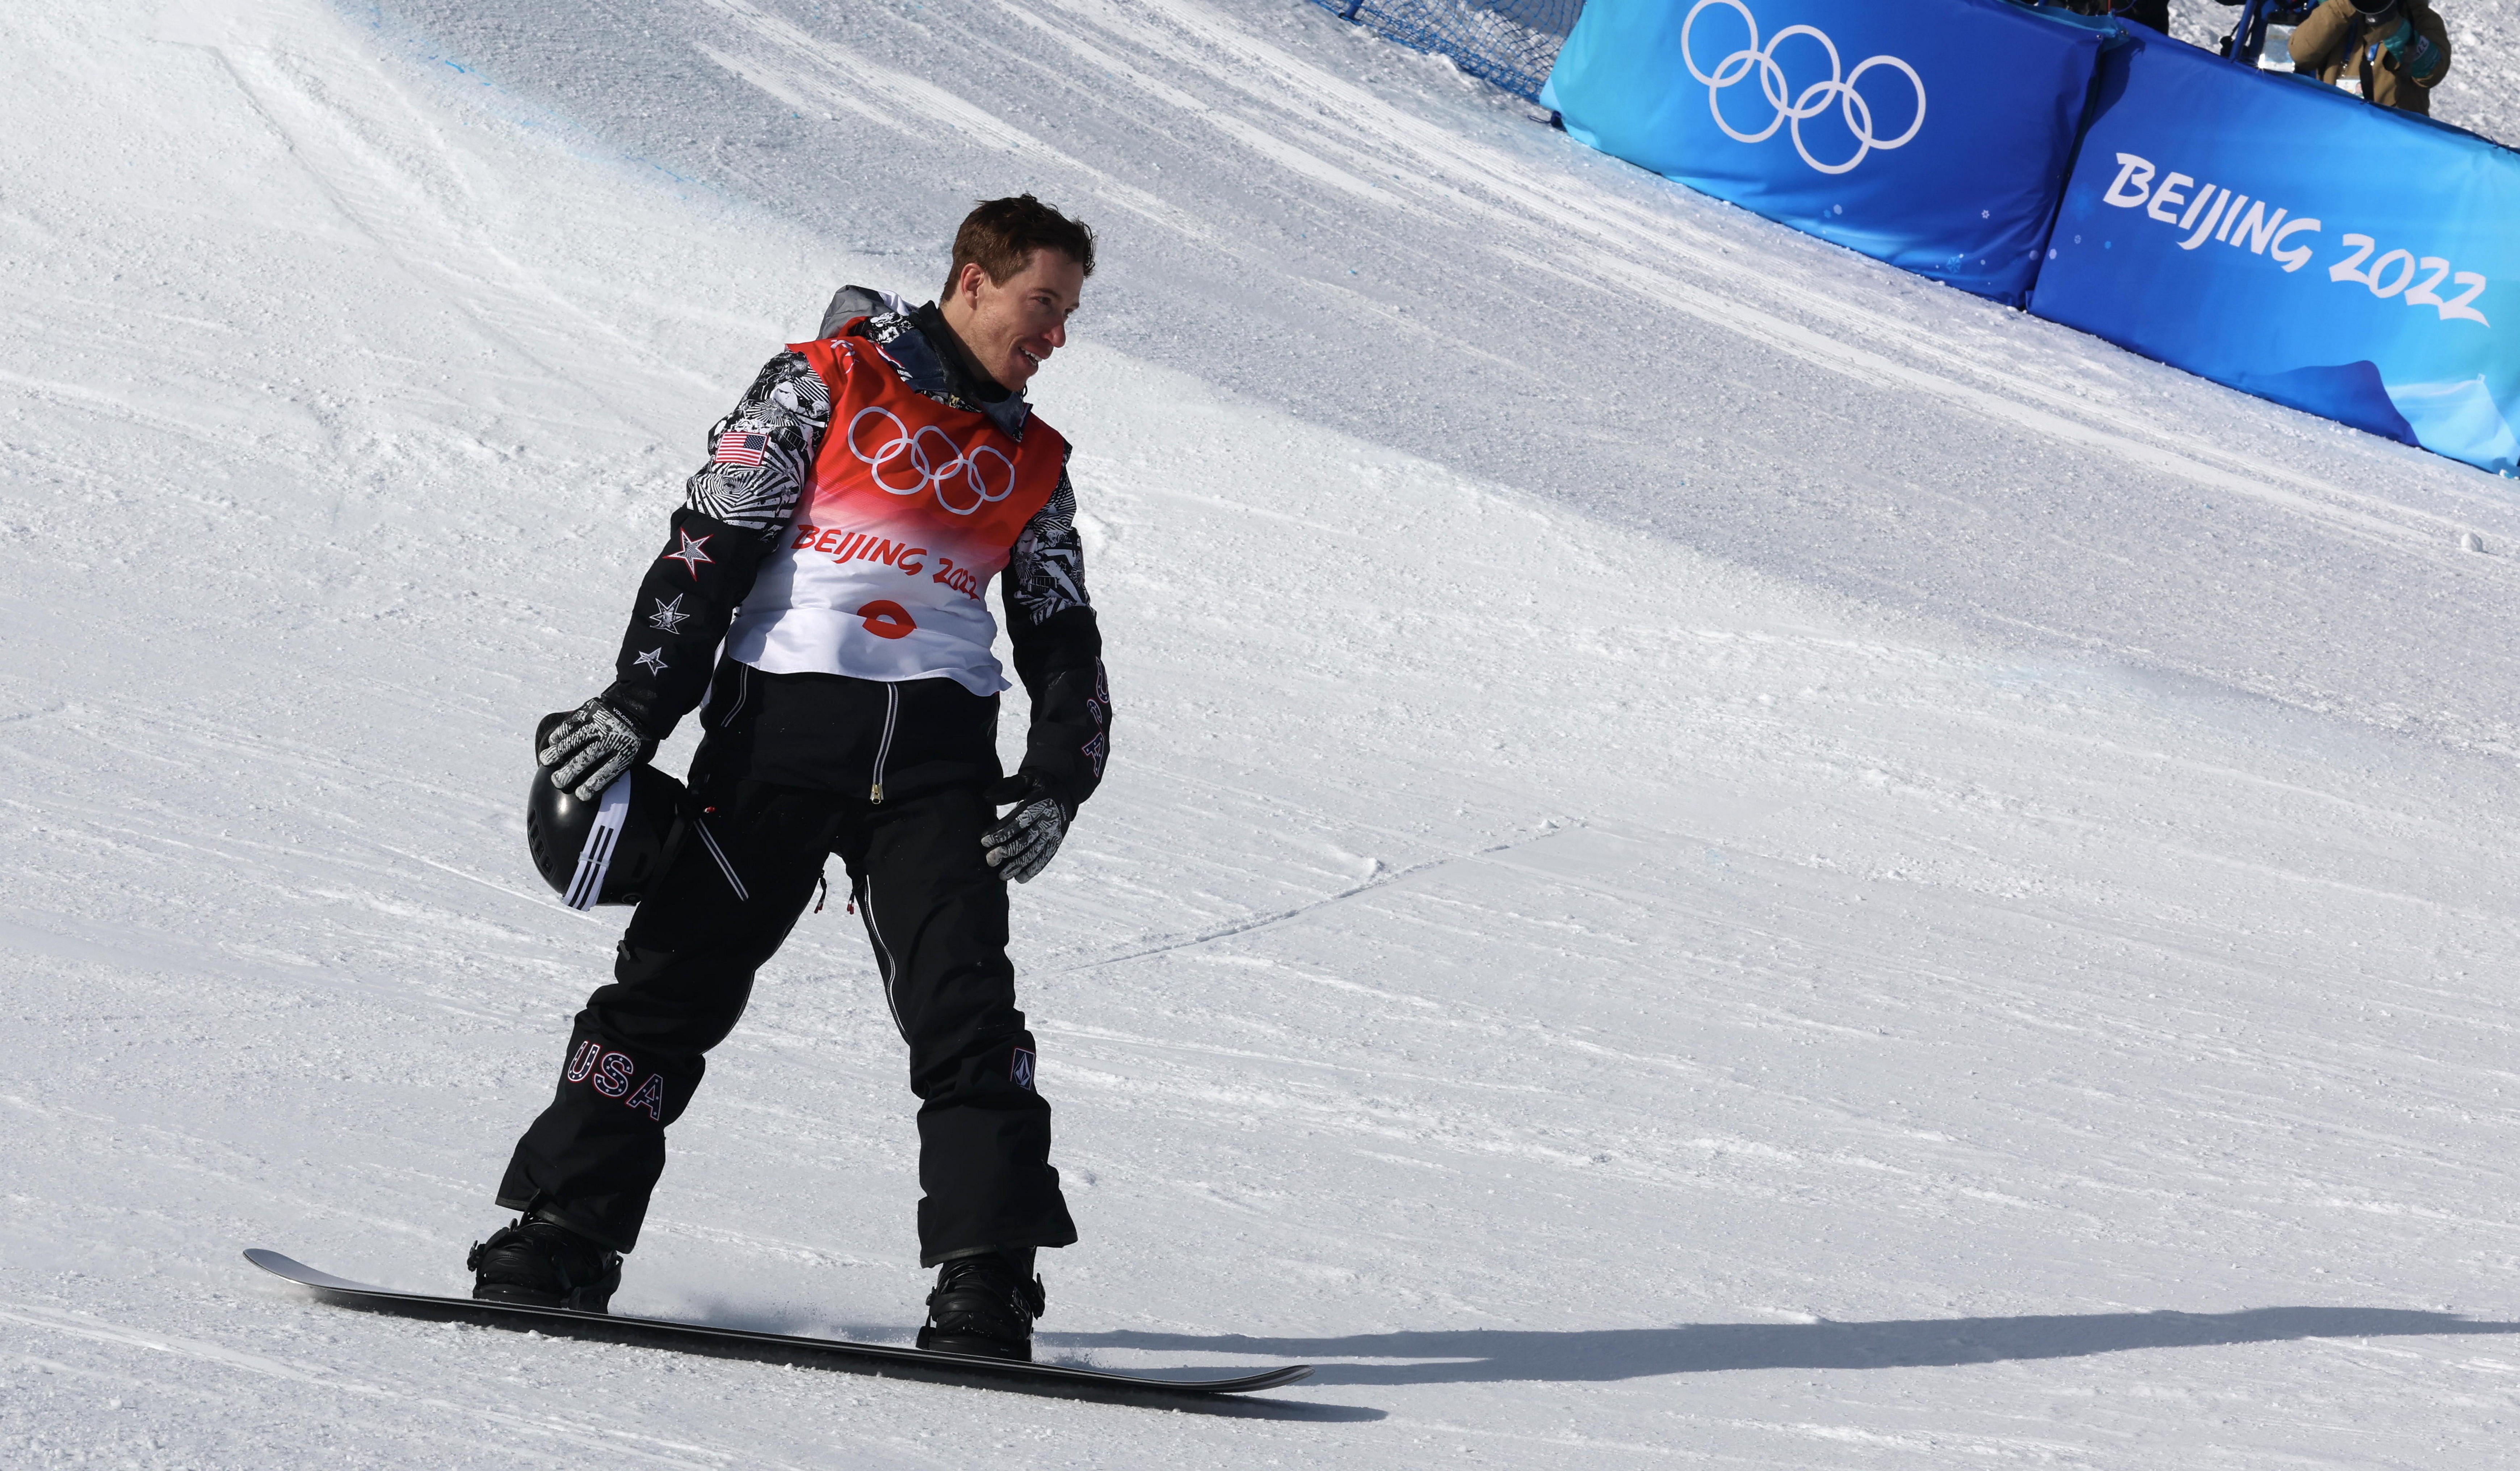 Shaun White completing his final run in the Men's Snowboard Halfpipe